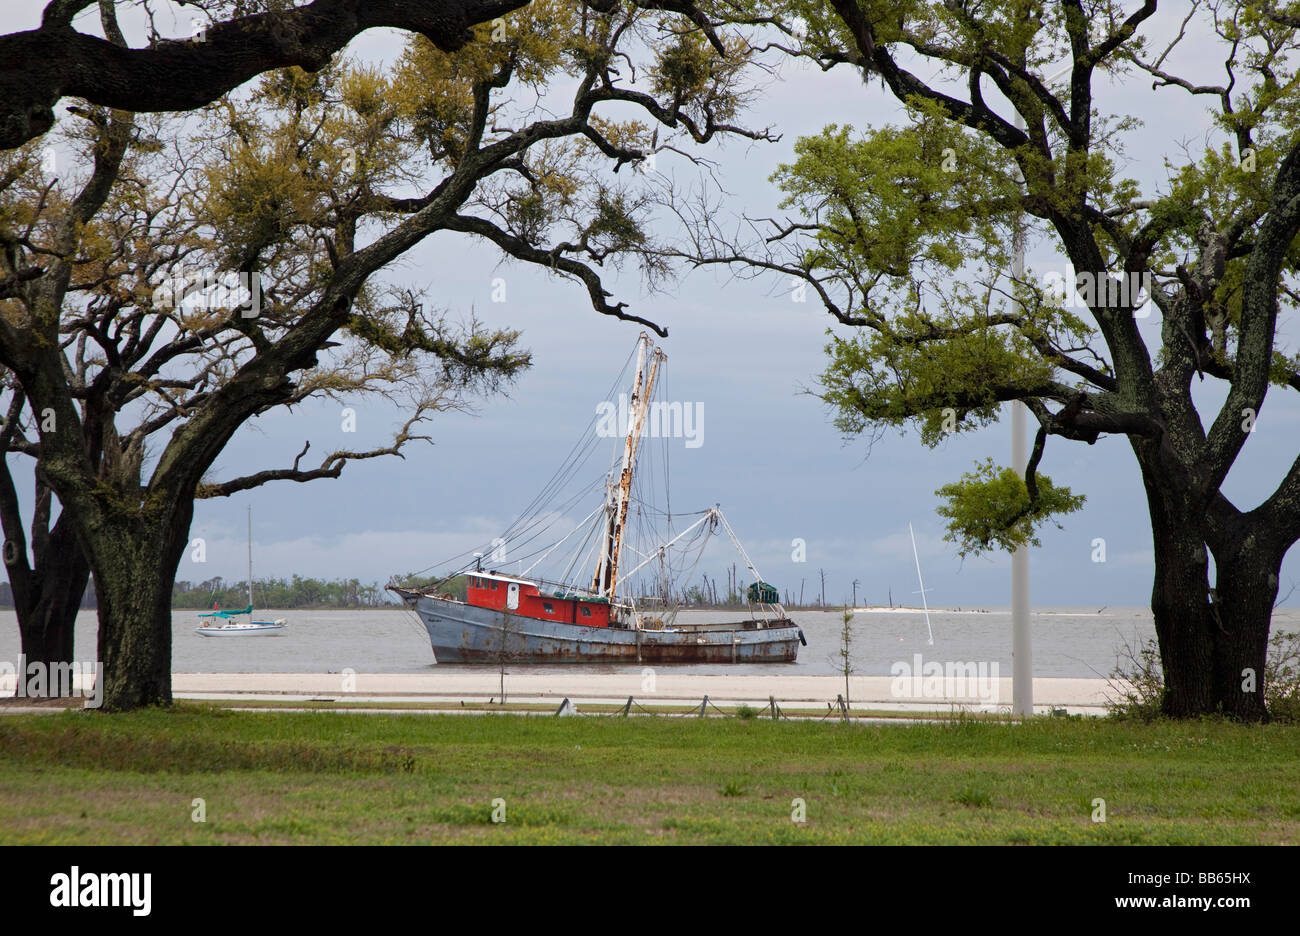 Biloxi Mississippi A fishing boat anchored on the Gulf of Mexico beach Stock Photo